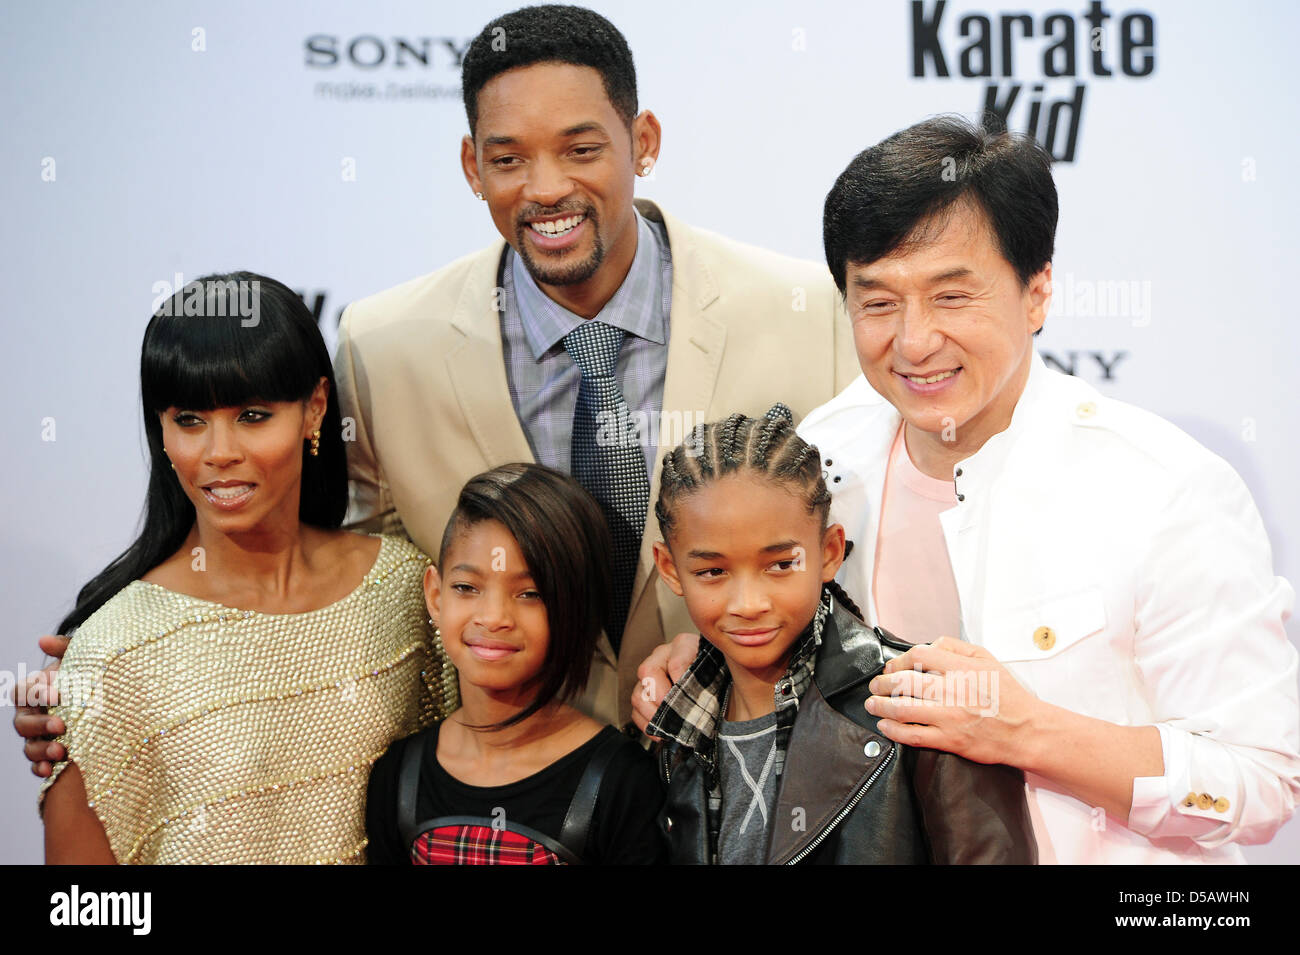 American actor Will Smith (back), his wife Jada Pinkett (front L-R), his daughter Willow, son Jaden and Hong Kong-born actor Jackie Chan pose on the red carpet at the premier of 'Karate Kid' in Berlin, Germany, 19 July 2010. The film will be shown in German cinemas starting 22 July 2010. Photo: Hannibal Hanschke Stock Photo